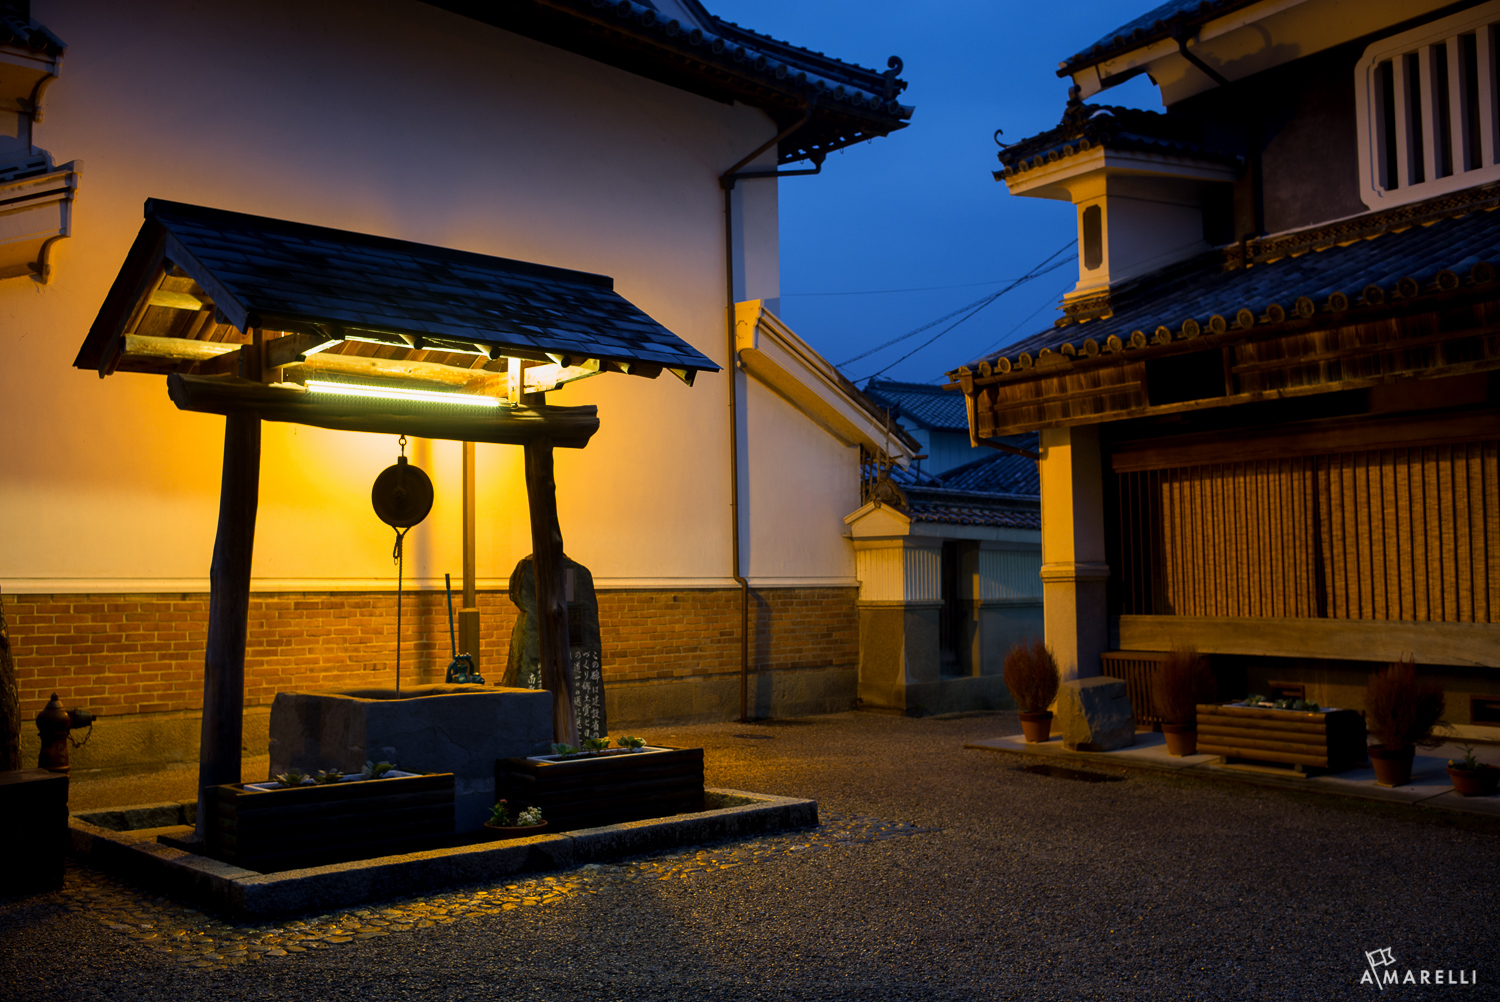 8-old-streets-of-udatsu-japan-by-adam-marelli